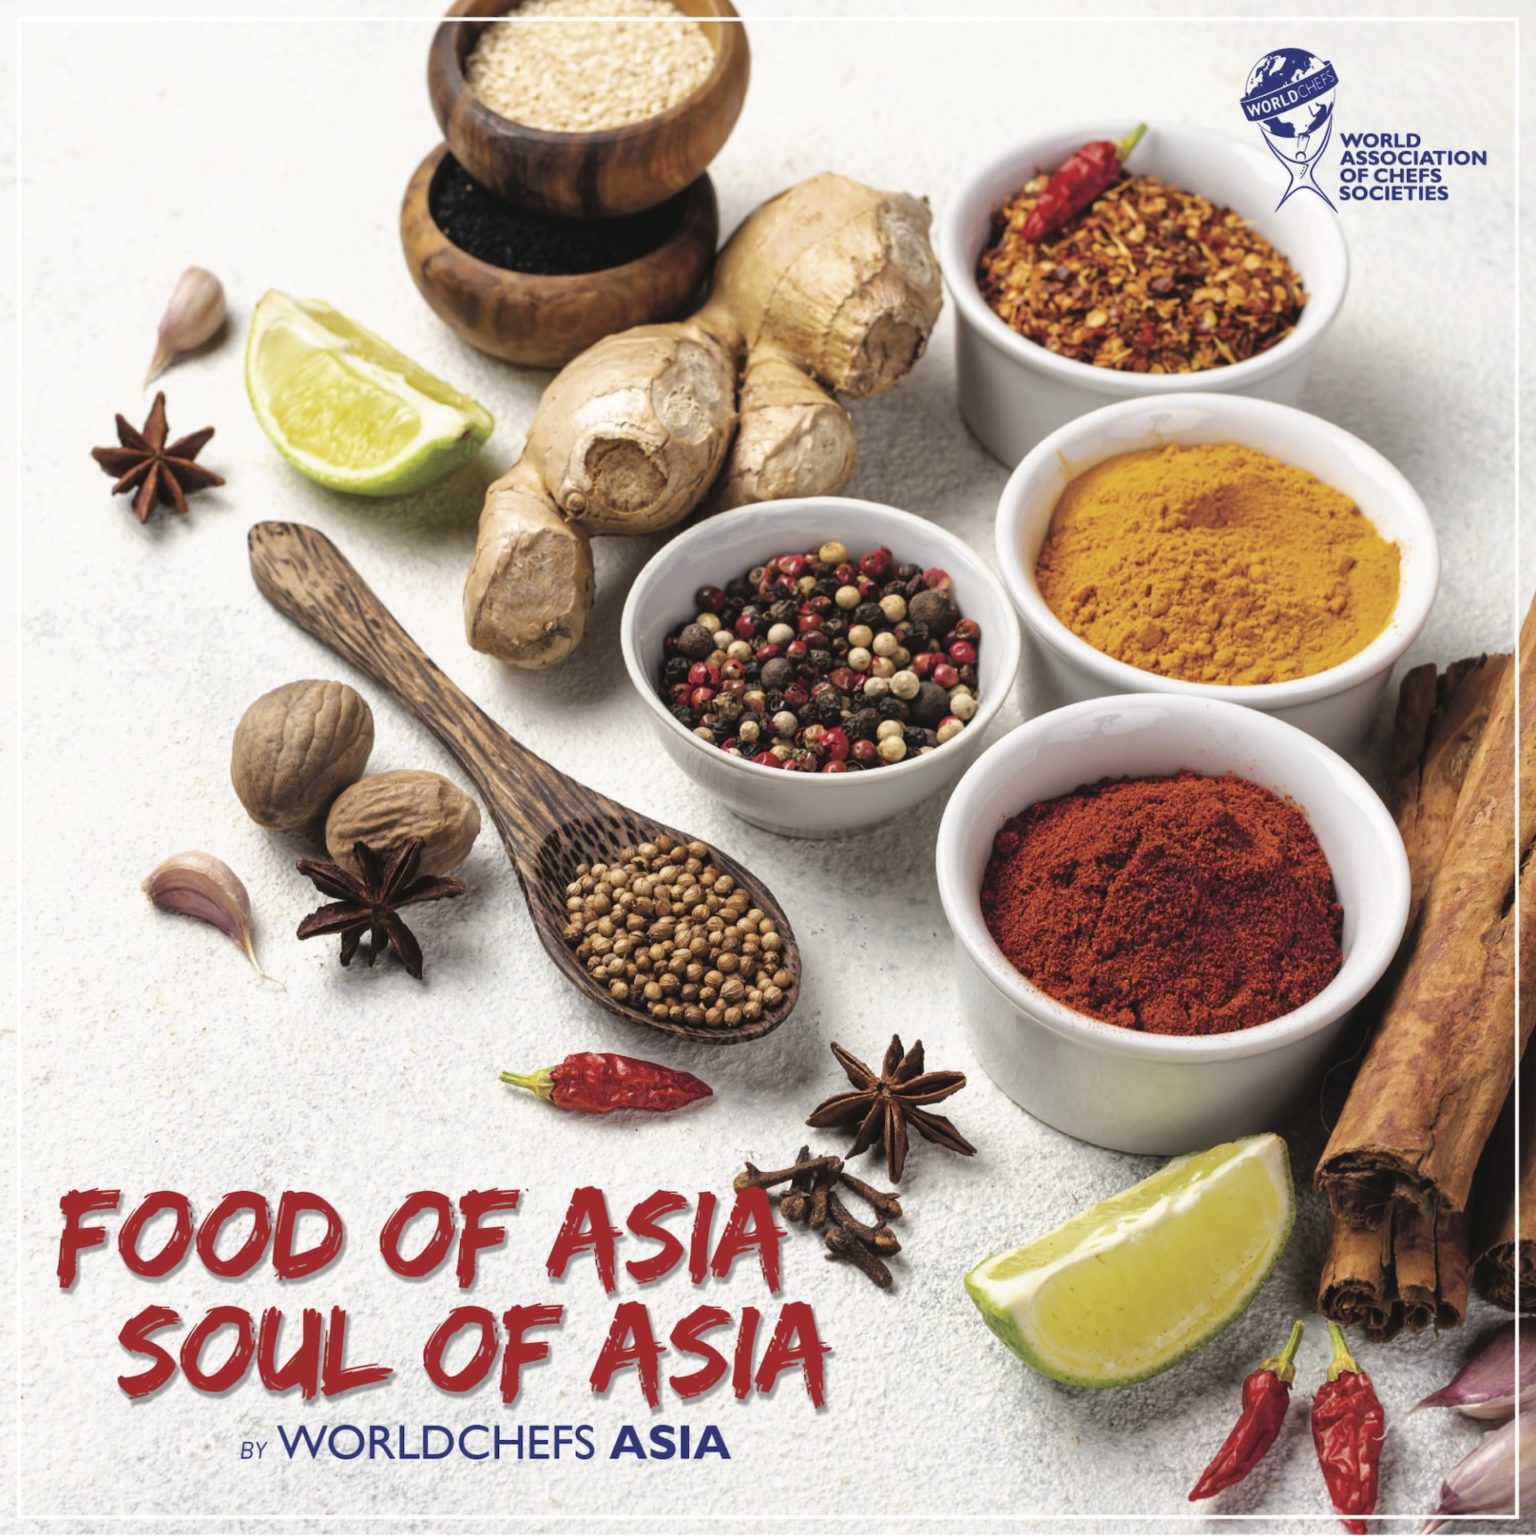 Food of Asia Soul of Asia e-book Worldchefs Asia members